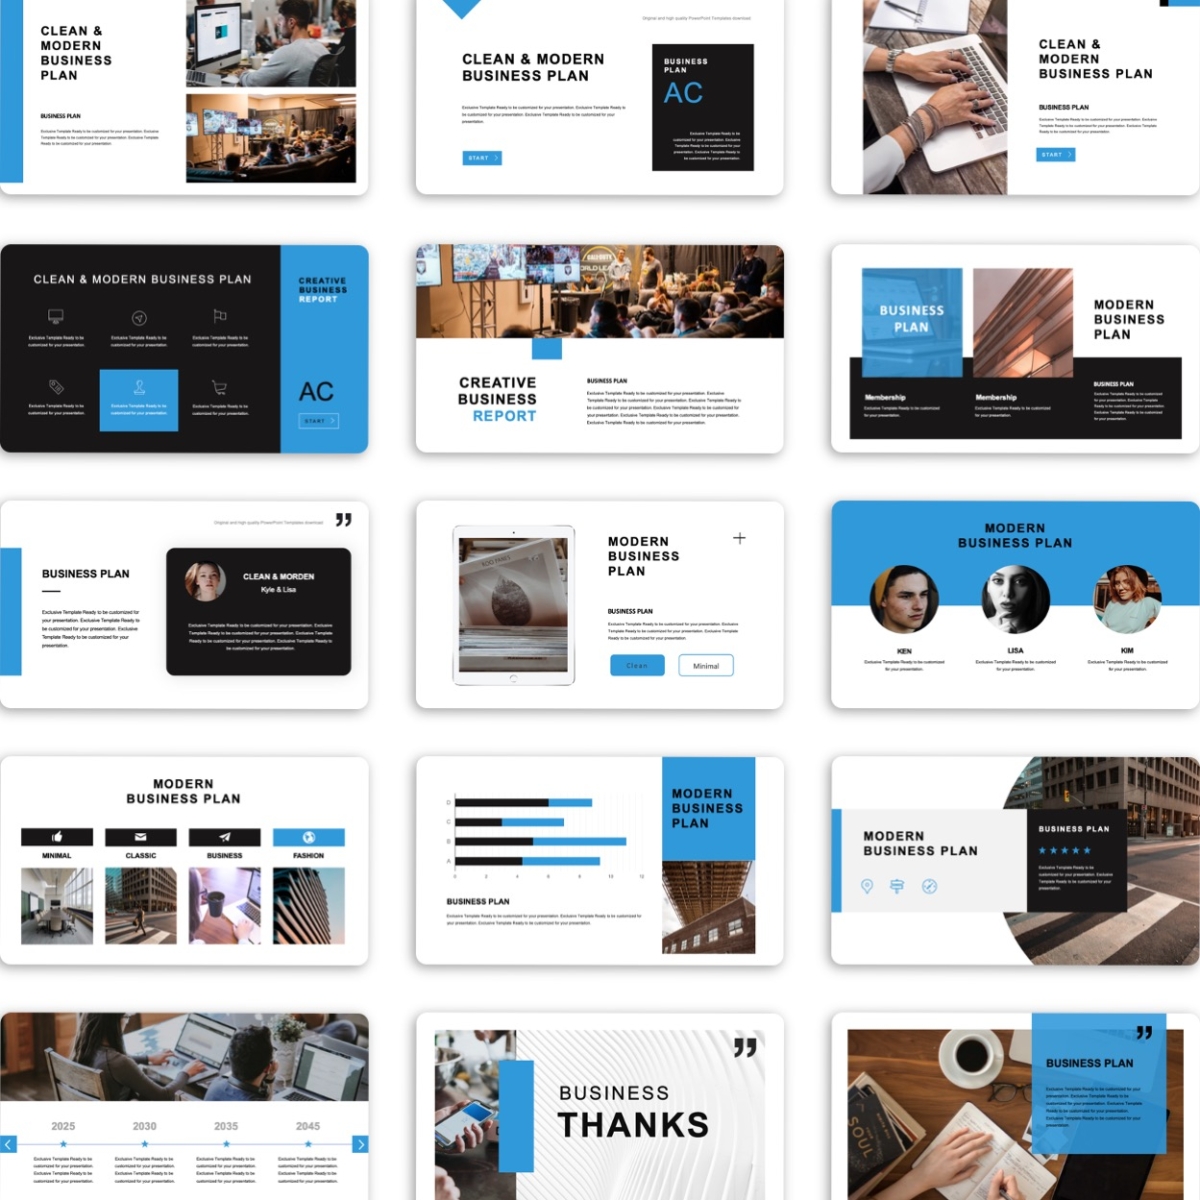 Annual Business Report Presentation Template